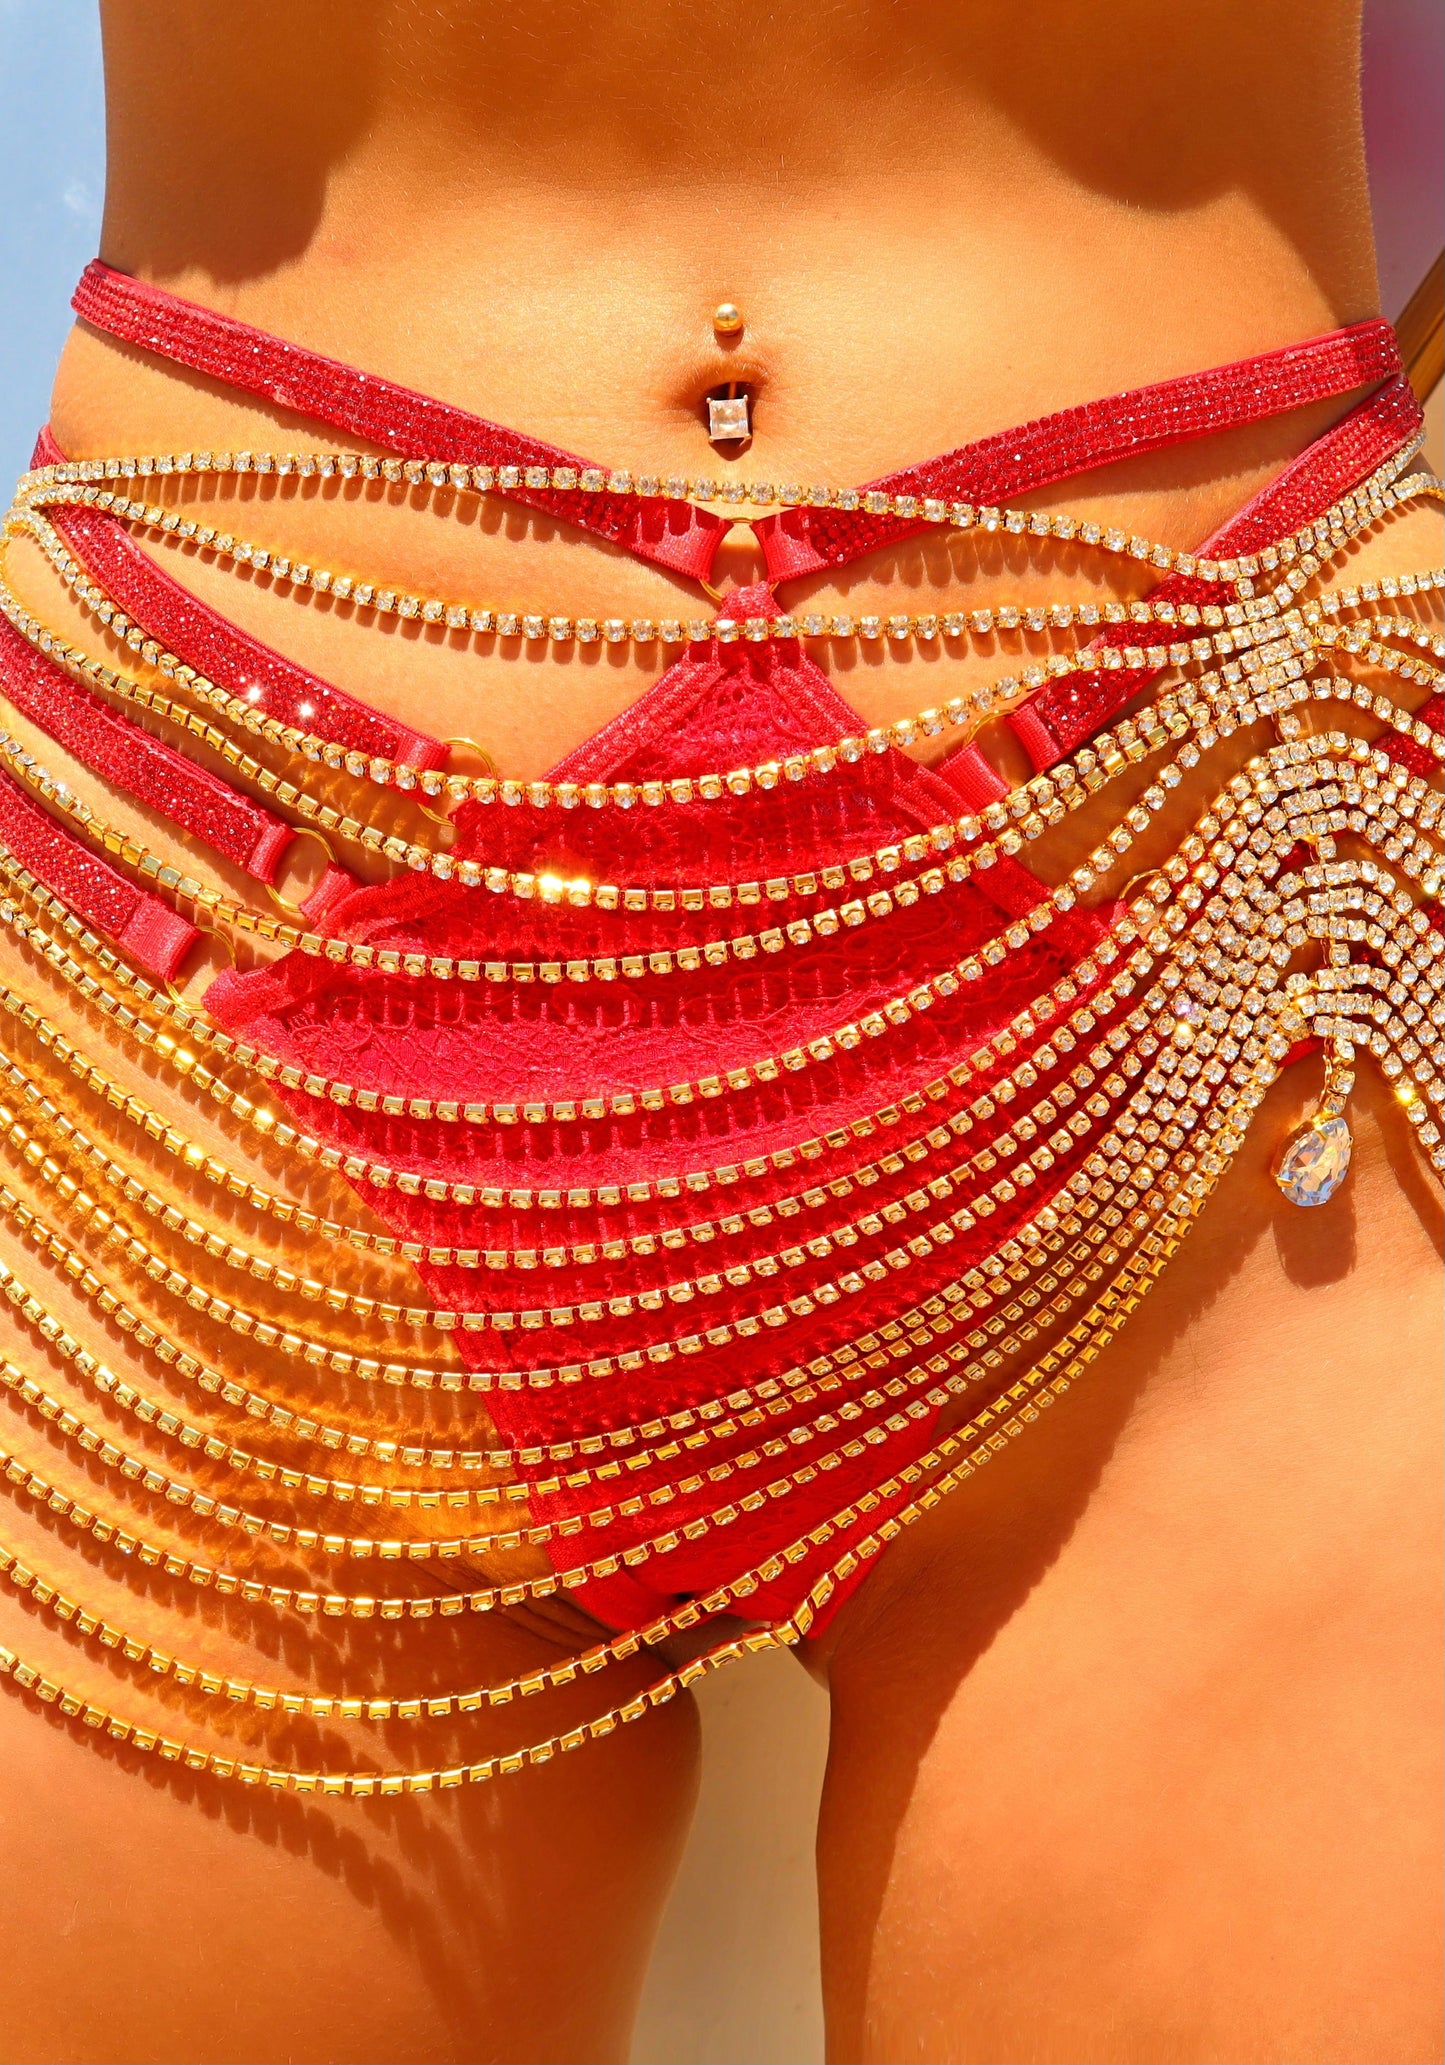 Chic beachwear accessory from Slay Swimwear's Bling Queen collection